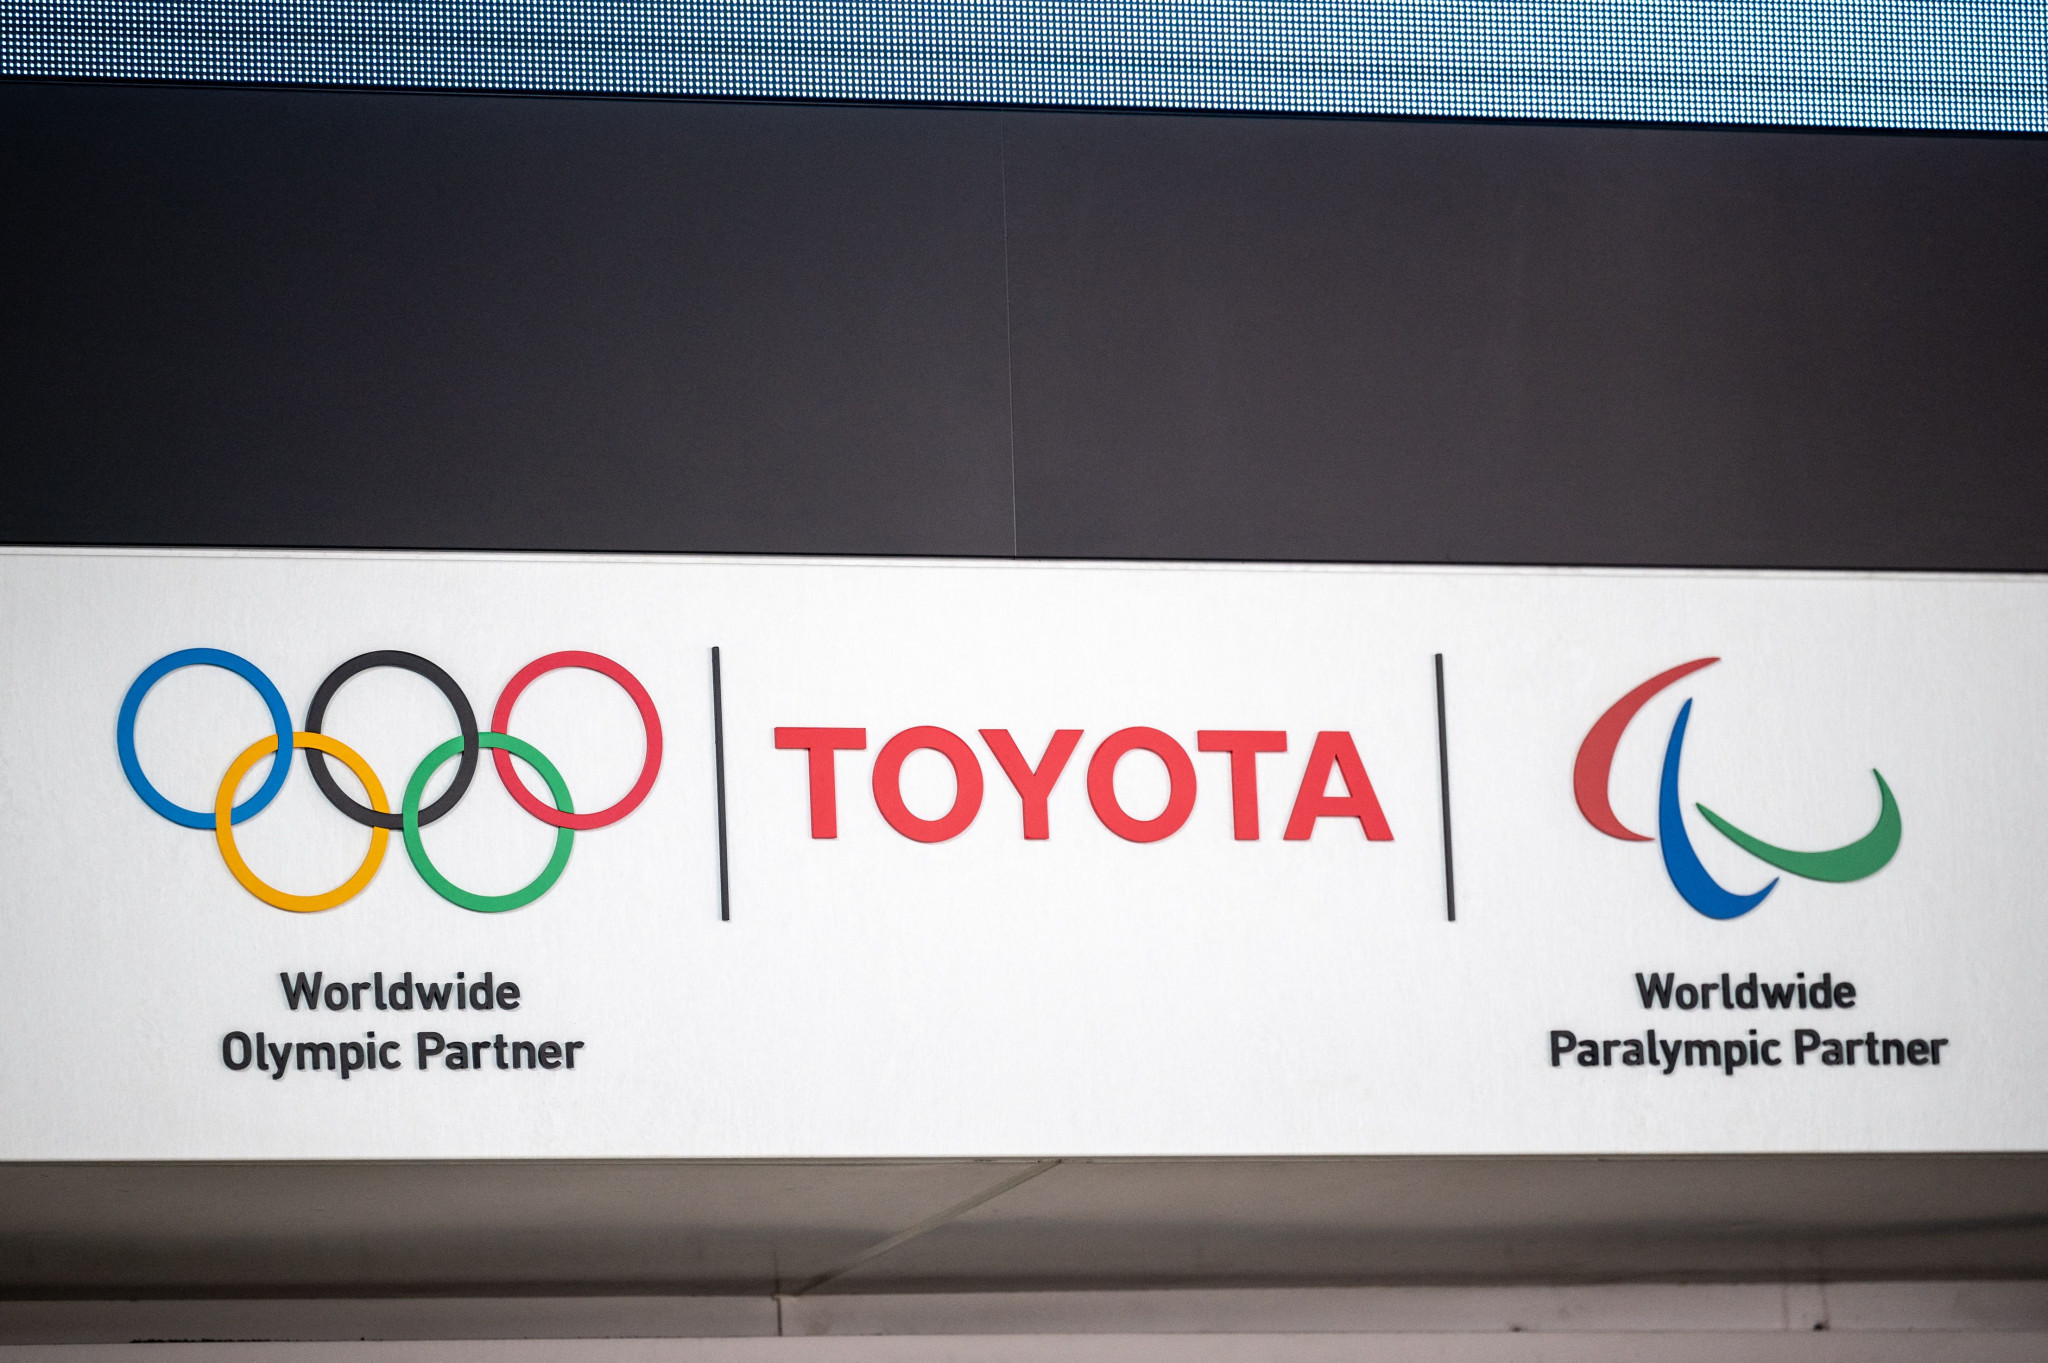 Toyota promises "mobility for all" through Paris 2024 Olympics and Paralympics fleet